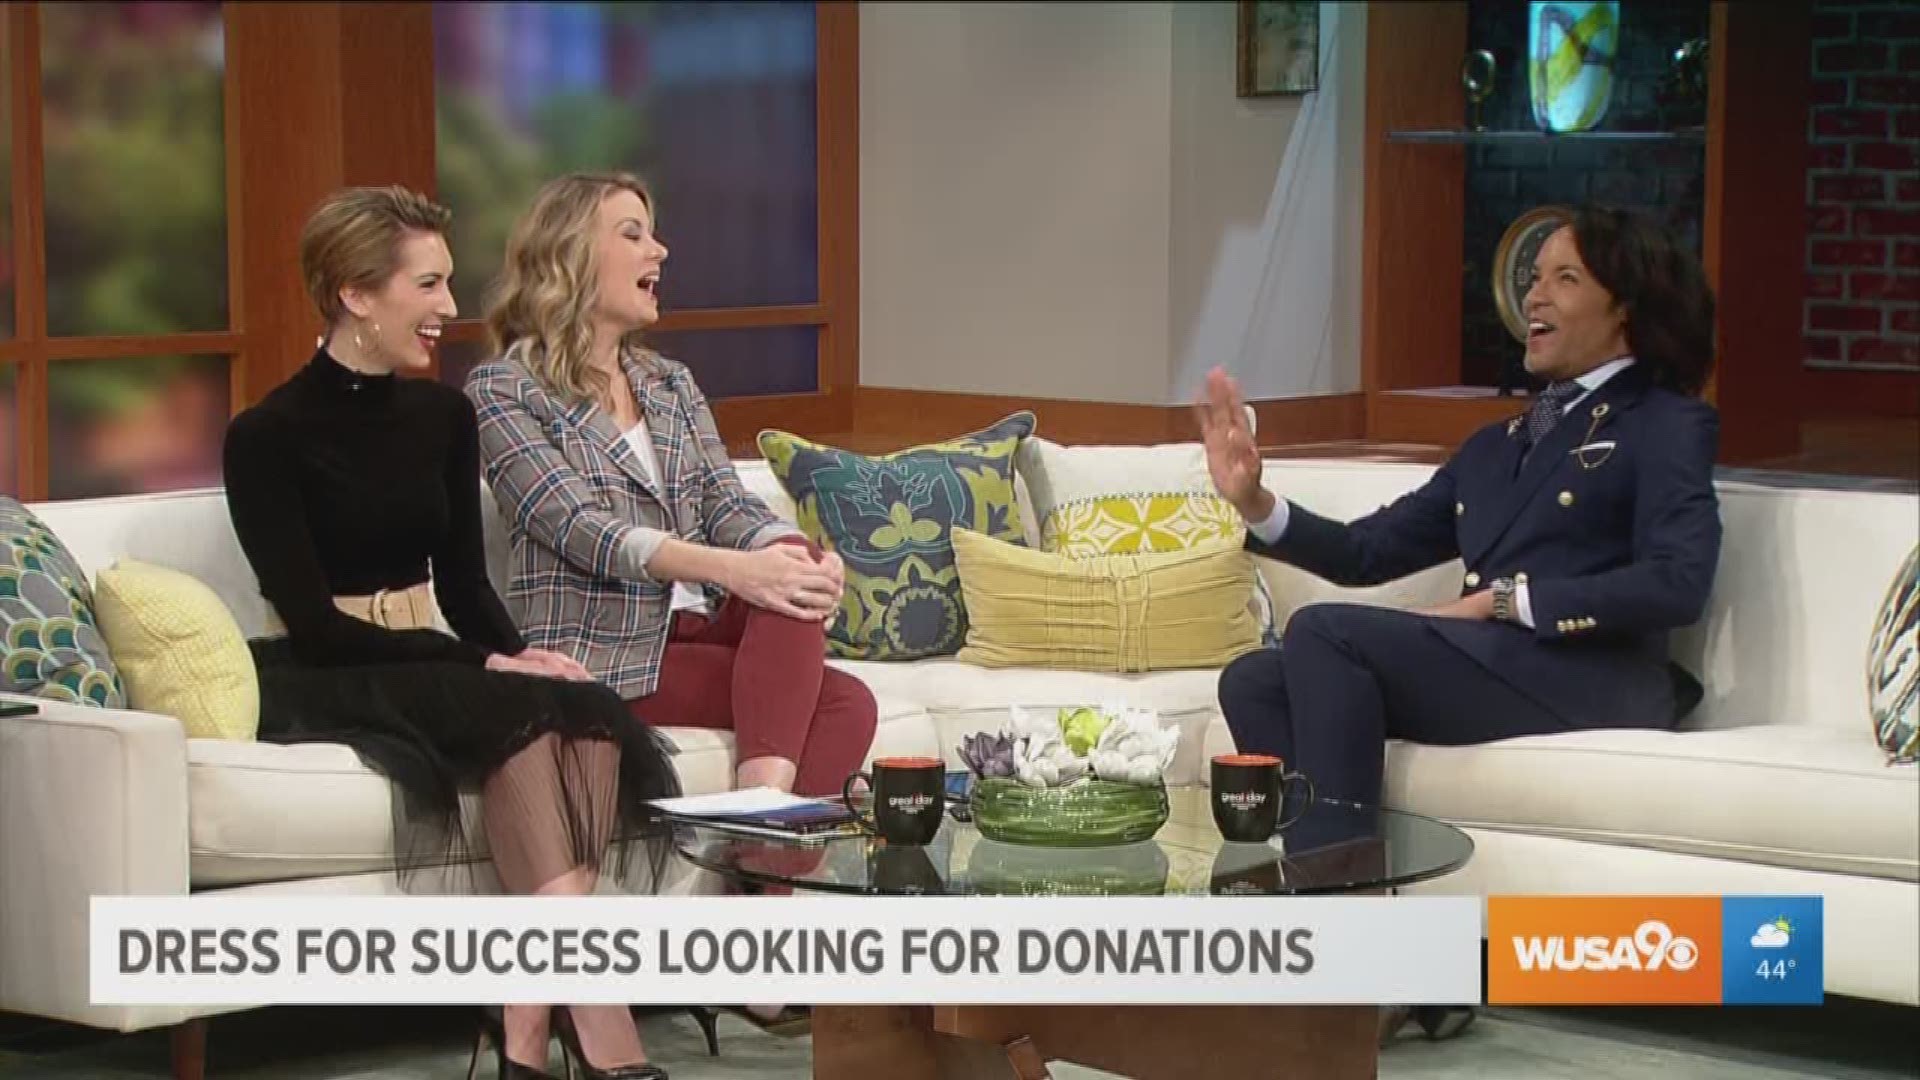 Paul Wharton talks topics of the day and the Dress for Success suit collection on March 6th at Pret a Manger on Pennsylvania Ave SE from 8am-1pm.